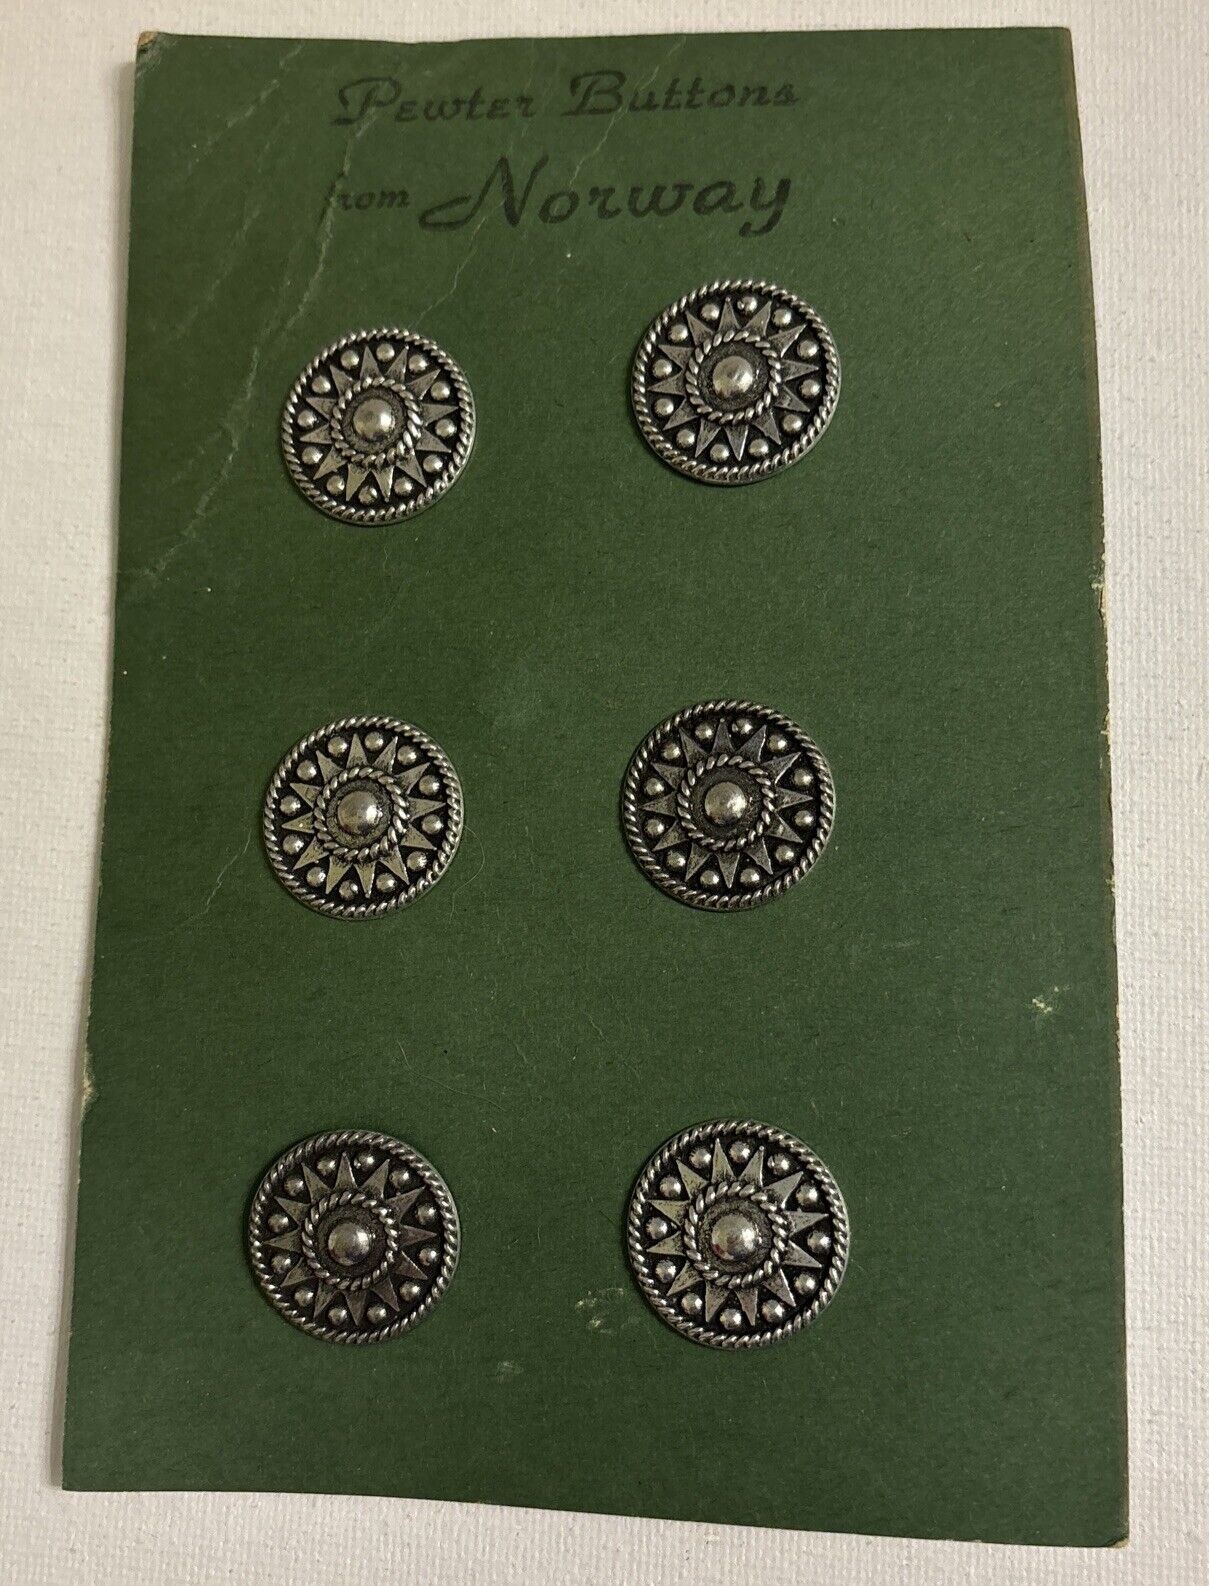 Vintage Pewter Buttons from Norway